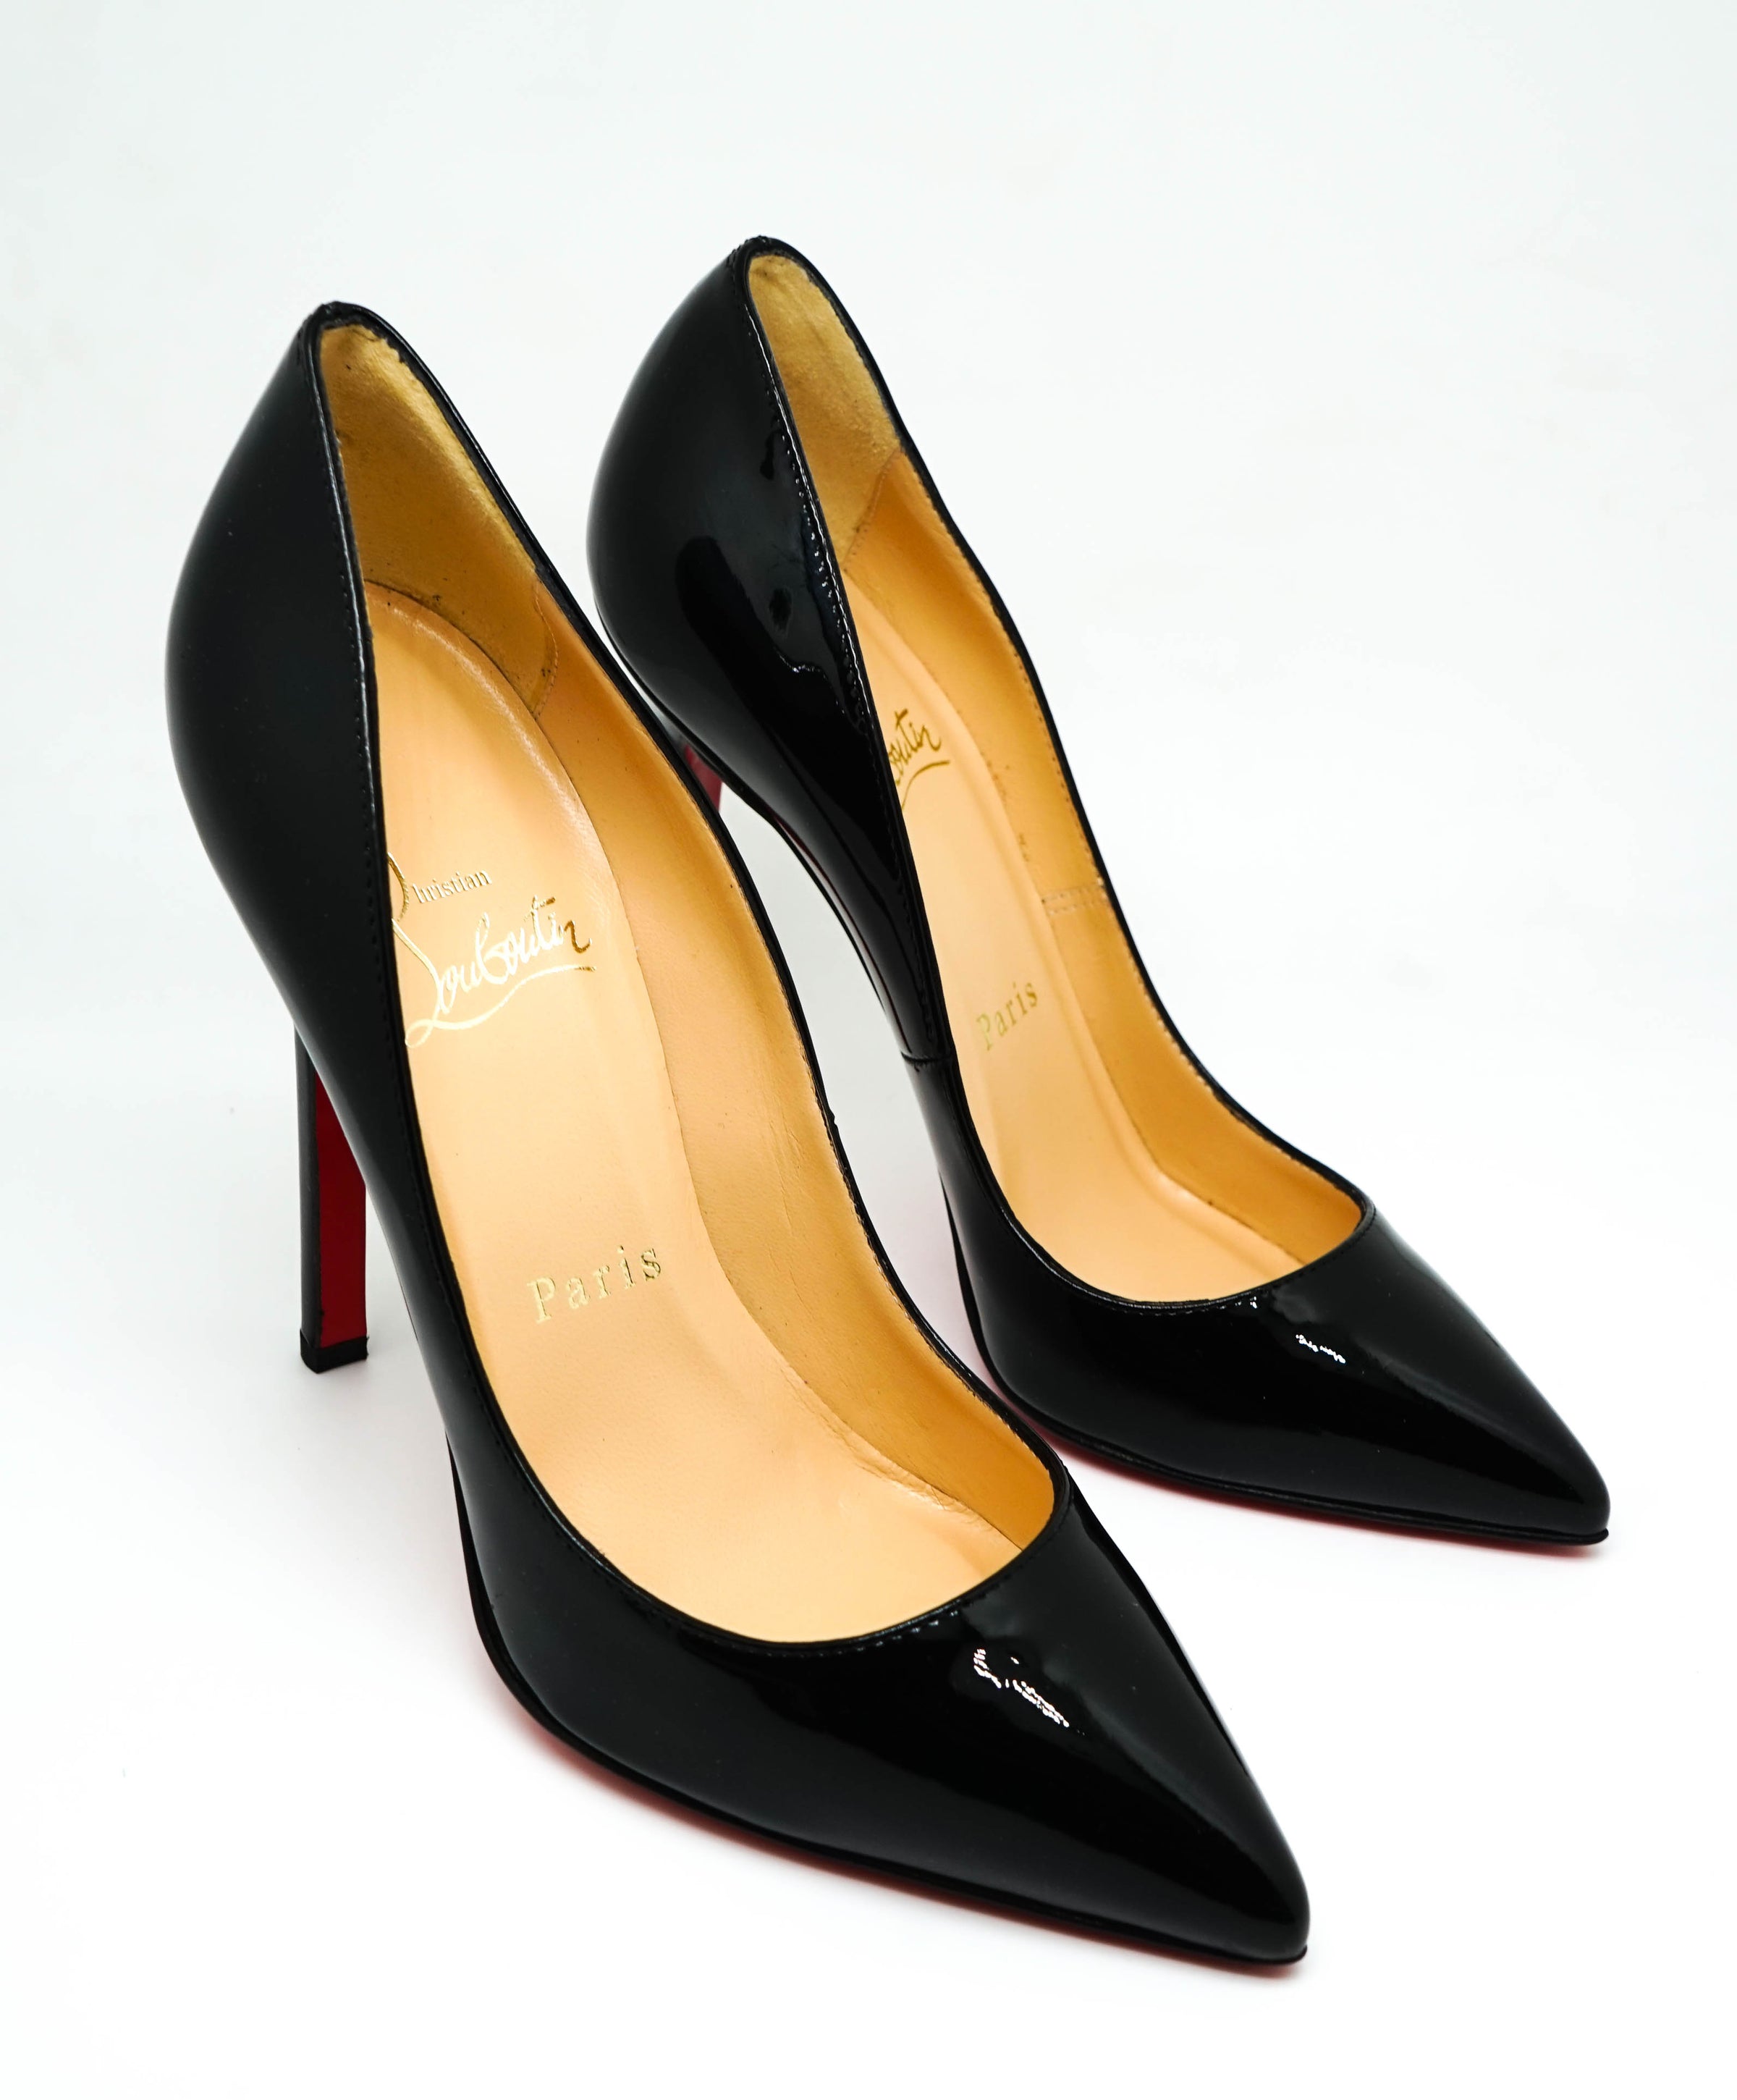 Christian Louboutin So Kate 120 Black Patent Leather Pumps Heels (Size 35.5)